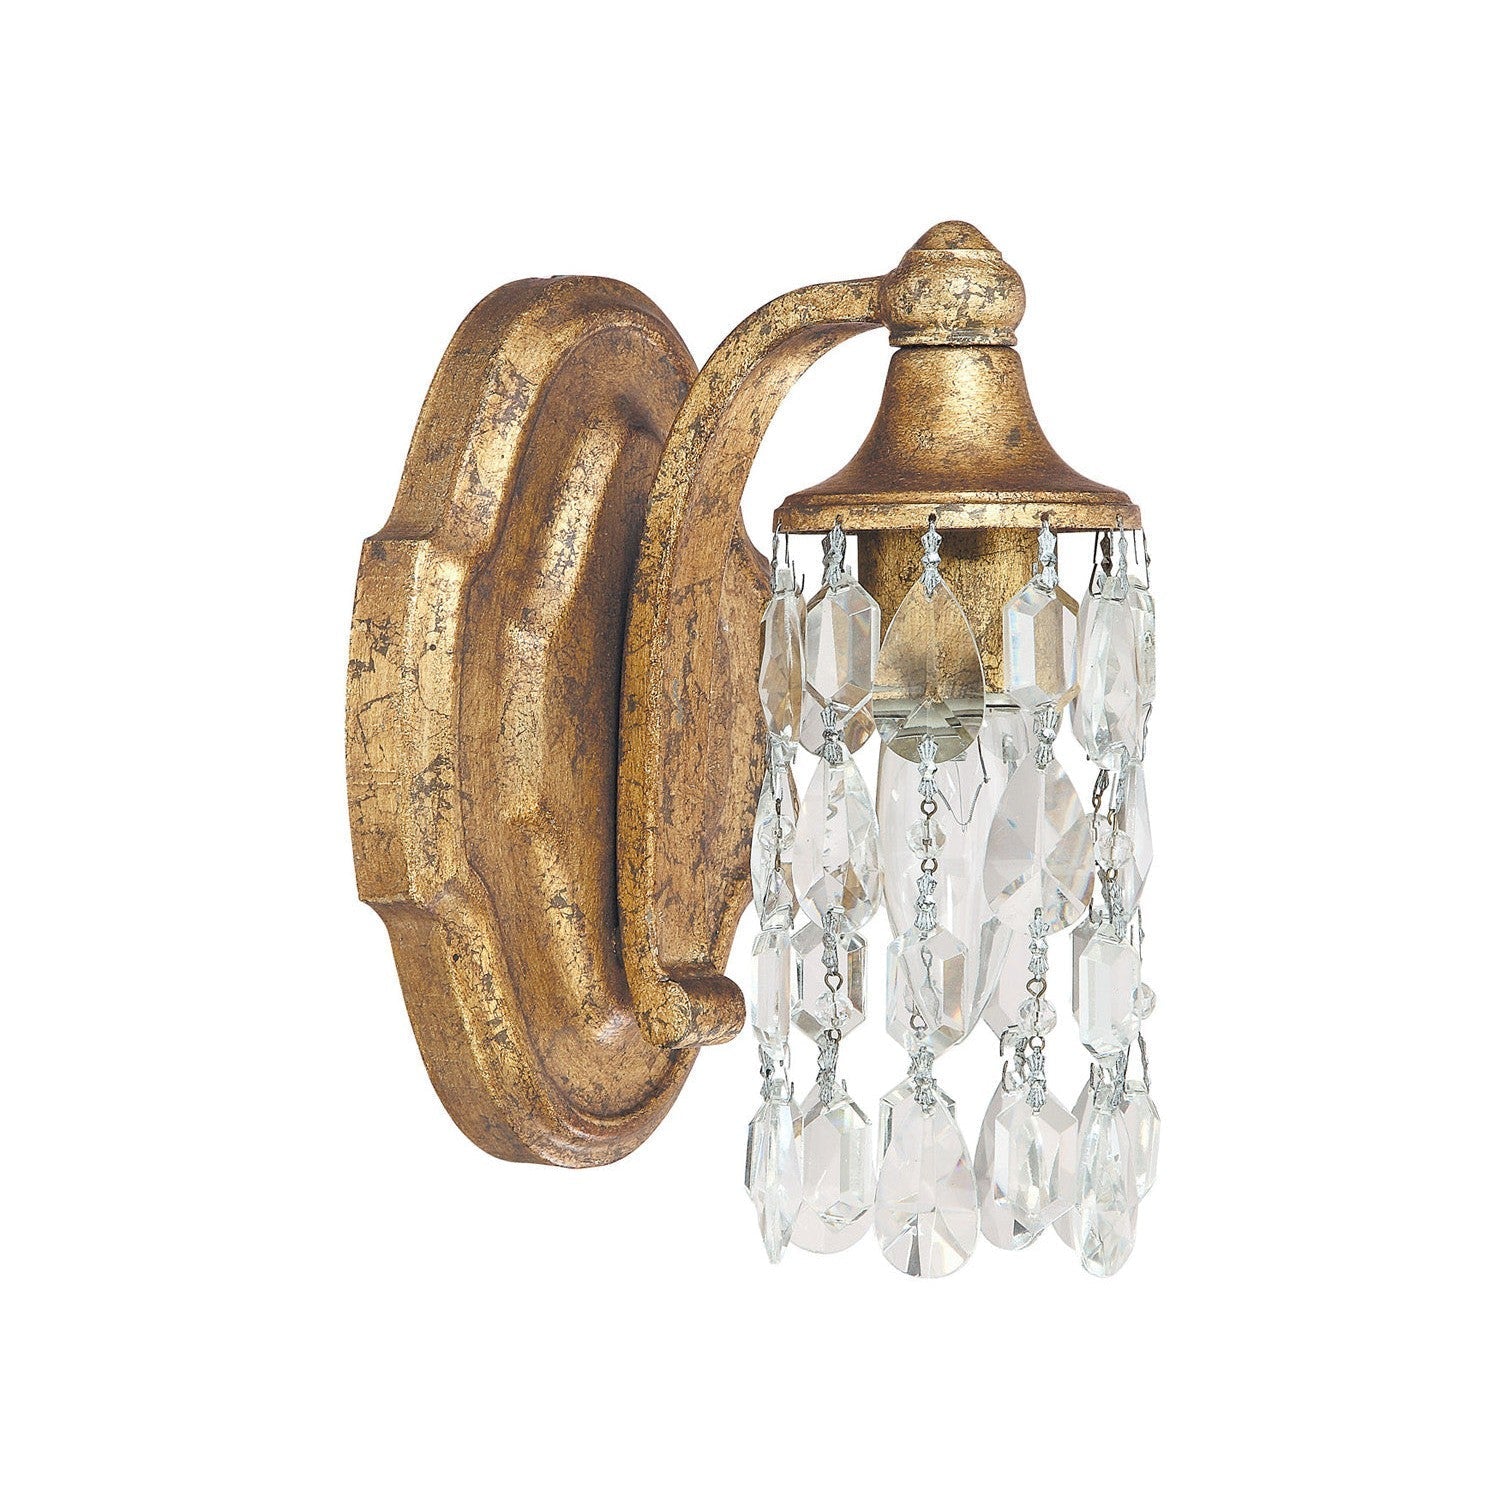 Capital Blakely 8521AG-CR Wall Sconce Light - Antique Gold